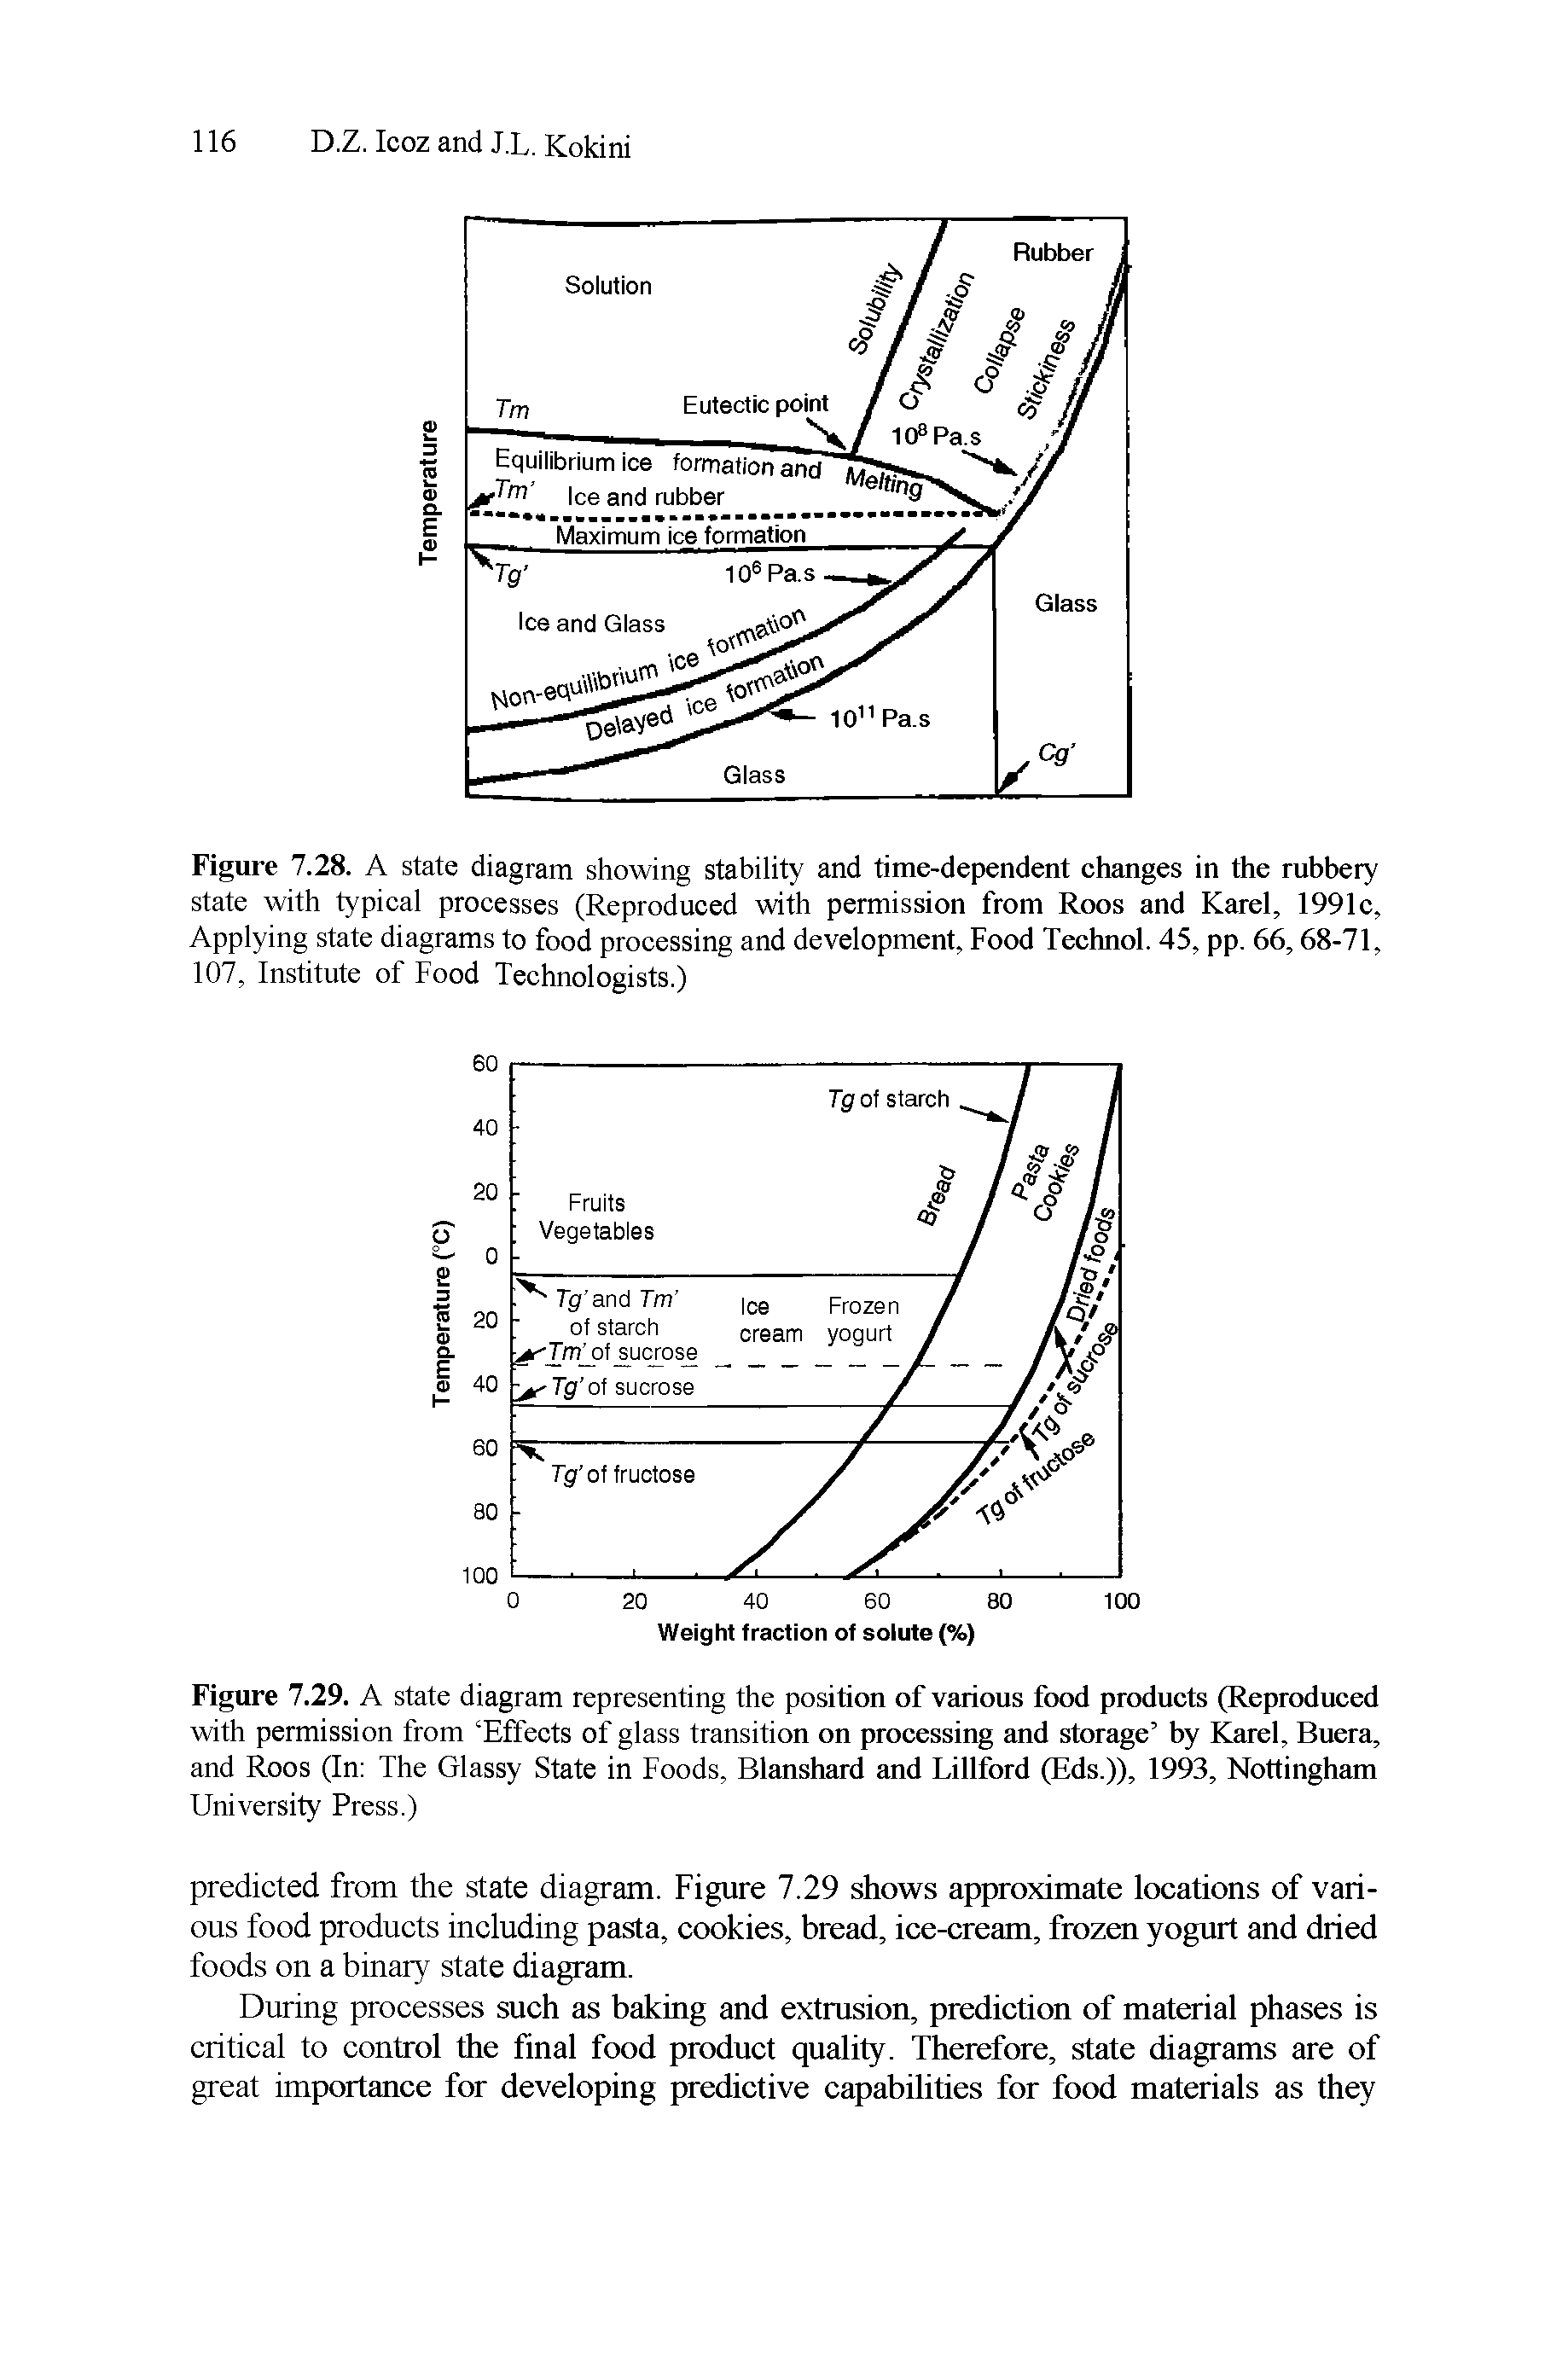 Figure 7.28. A state diagram showing stability and time-dependent changes in the rubbery state with typical processes (Reproduced with permission from Roos and Karel, 1991c, Applying state diagrams to food processing and development. Food Technol. 45, pp. 66,68-71, 107, Institute of Food Technologists.)...